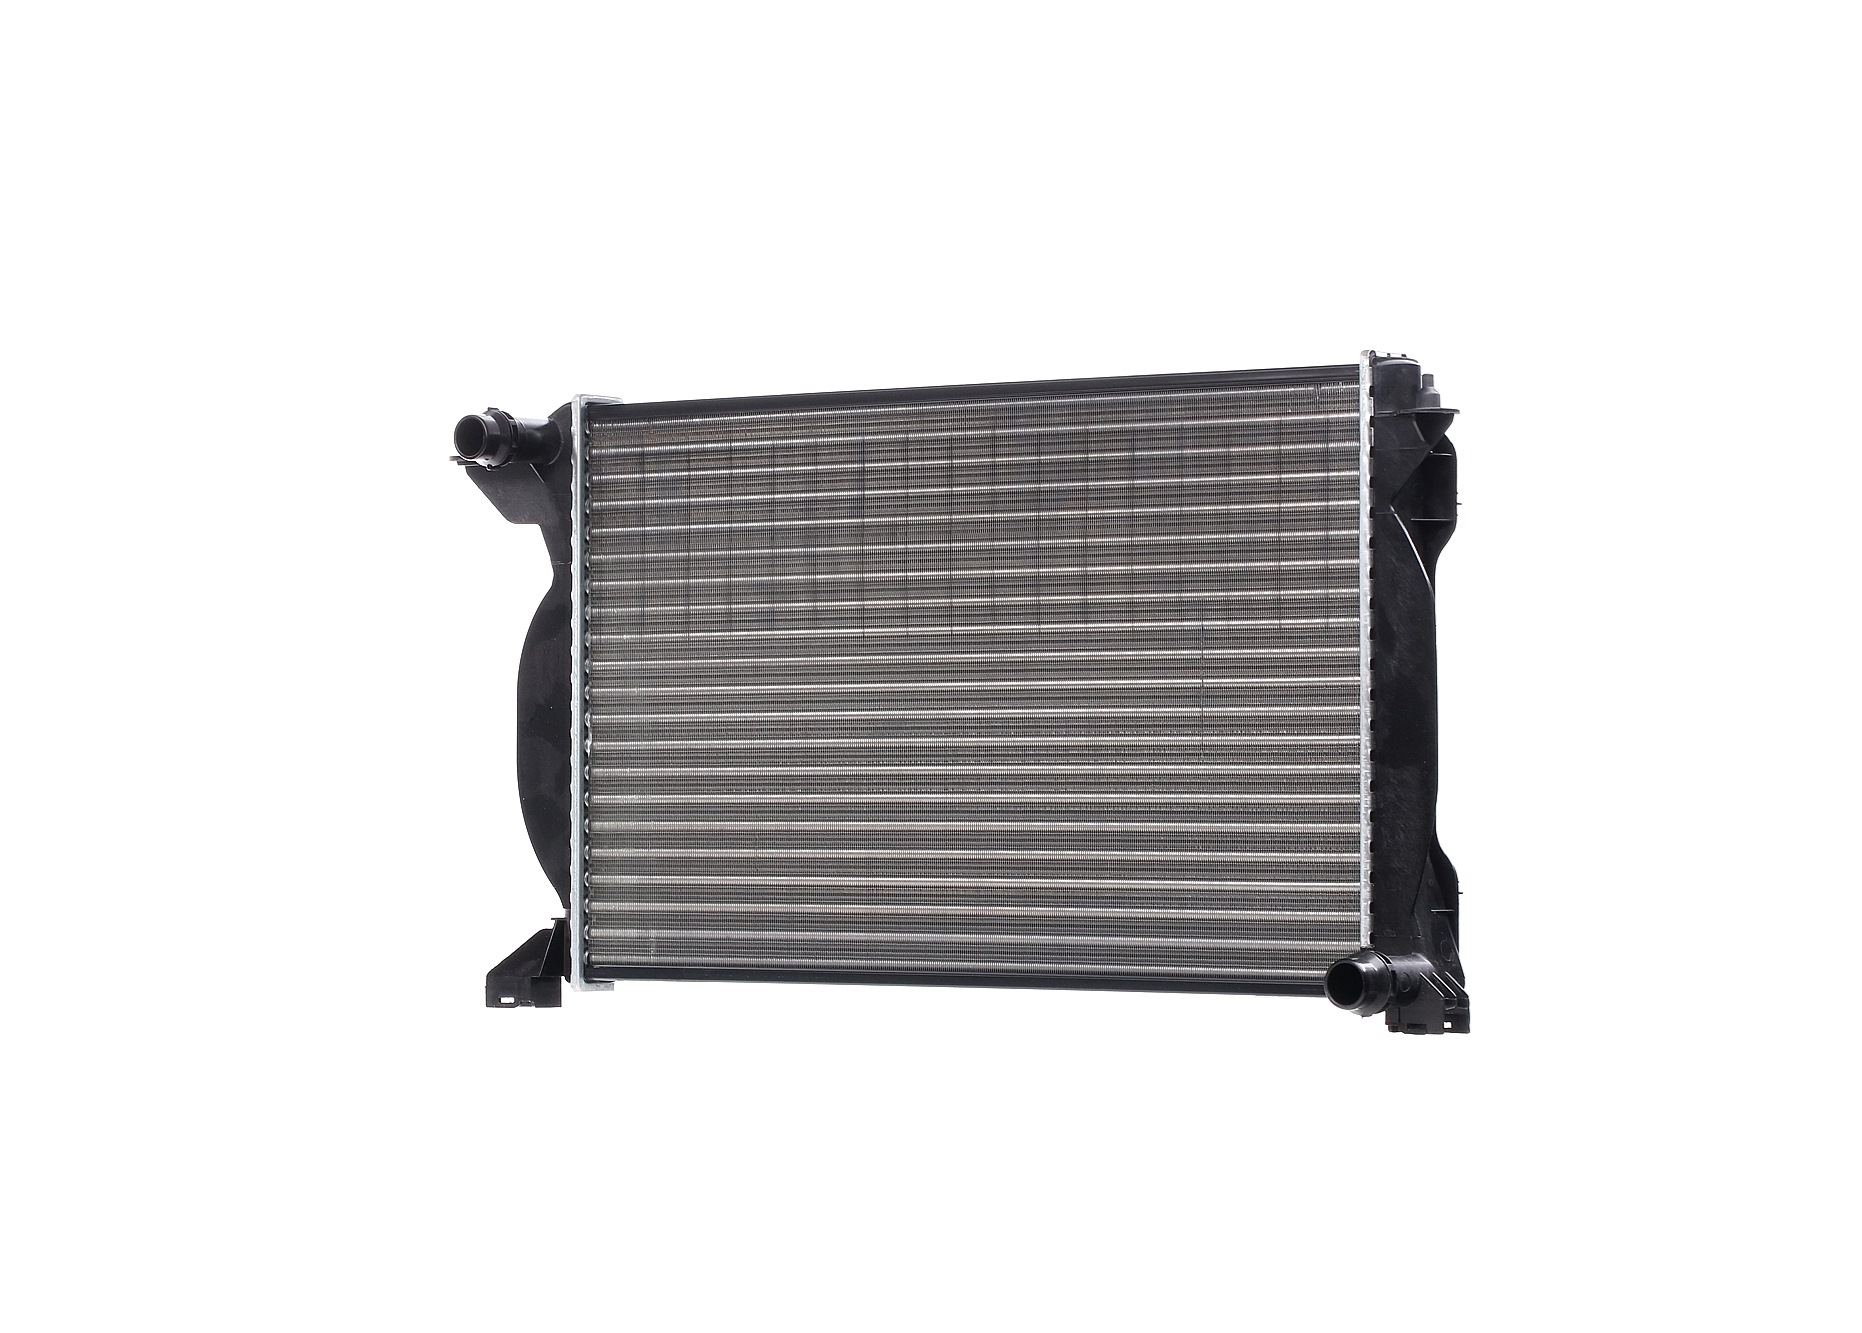 STARK SKRD-0120374 Engine radiator Aluminium, Plastic, for vehicles with/without air conditioning, Manual Transmission